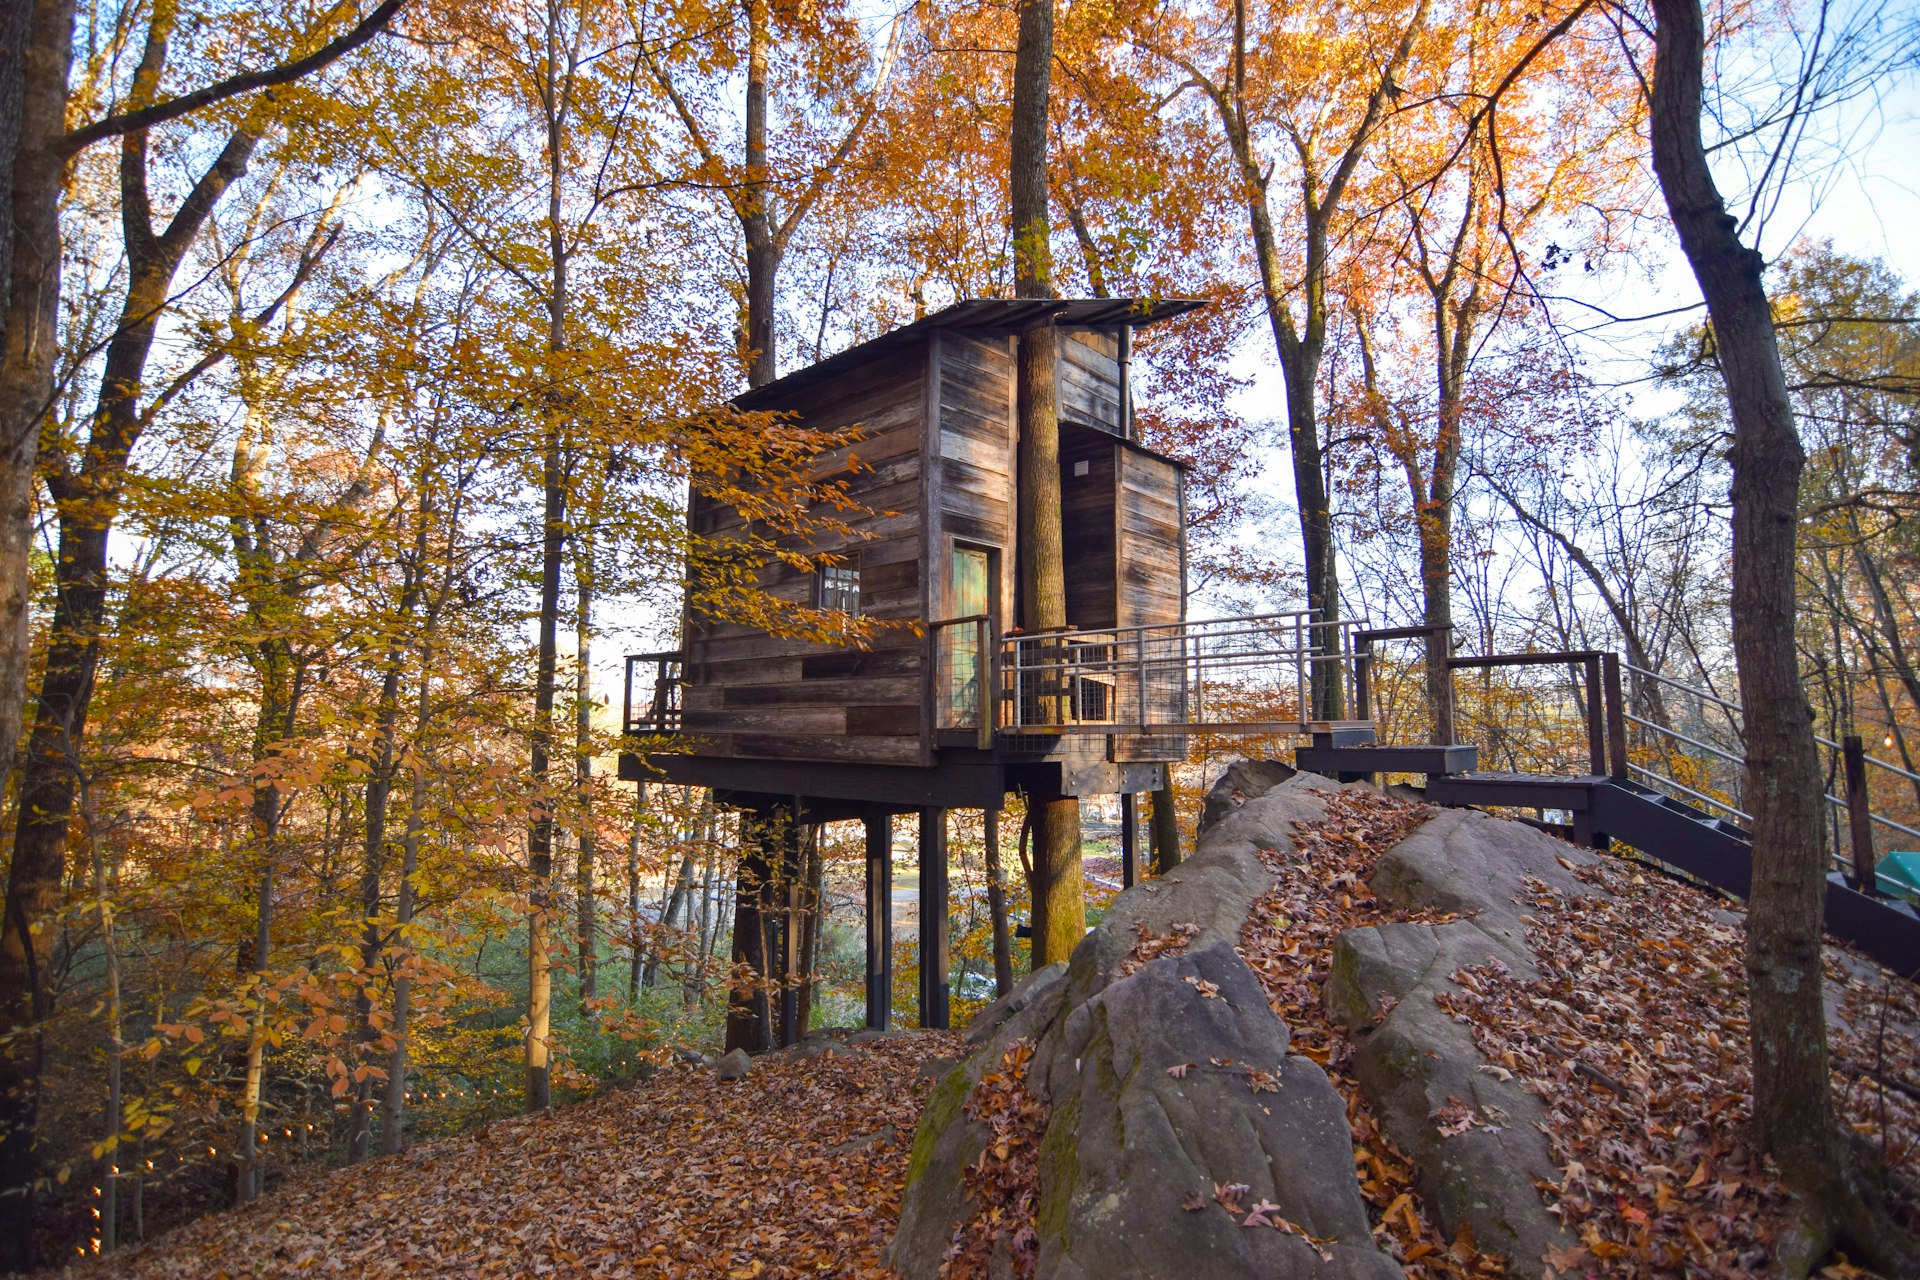 Tree house at Treetop Hideaways surrounded by trees and fall leaves in Chattanooga, Tennessee